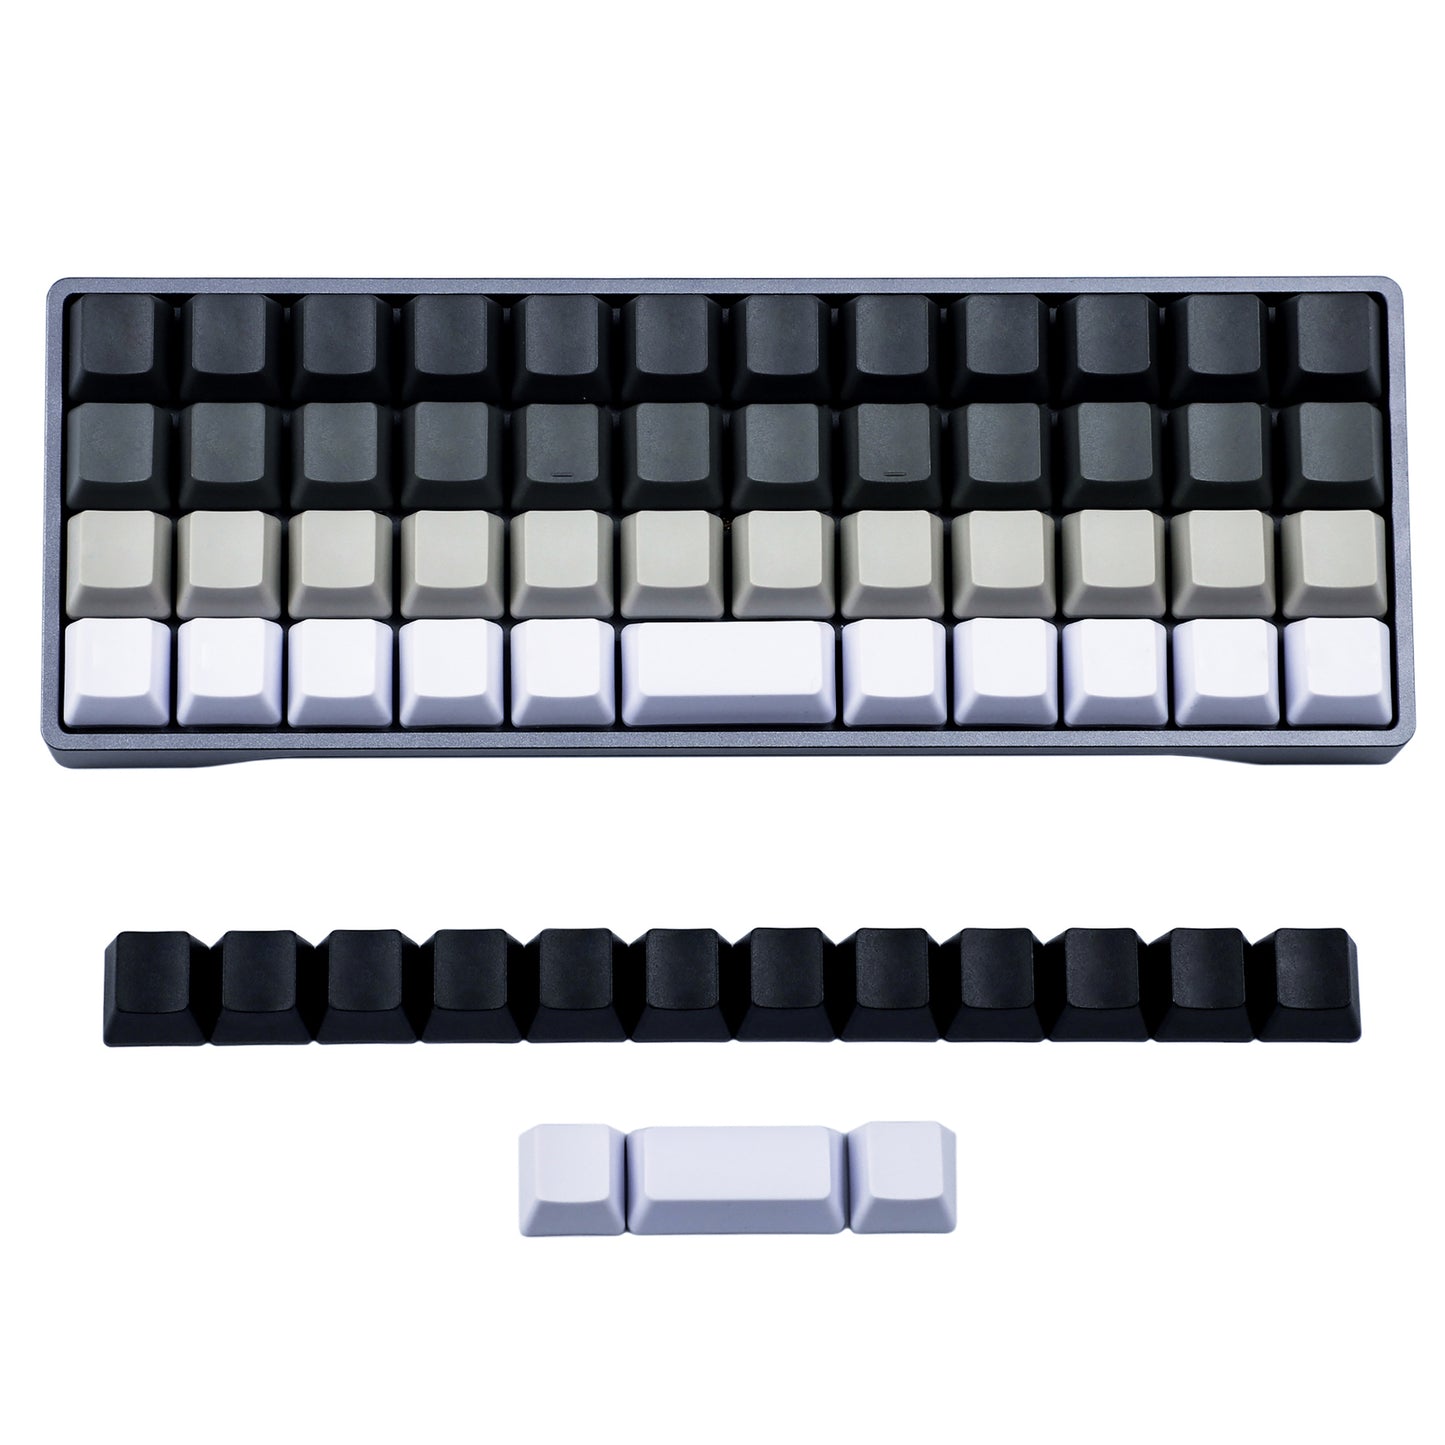 62 Laser-Etched Black Gray White Keycaps(Planck Niu40 Preonic 40% Using/OEM Profile 1.5mm Thickness PBT)